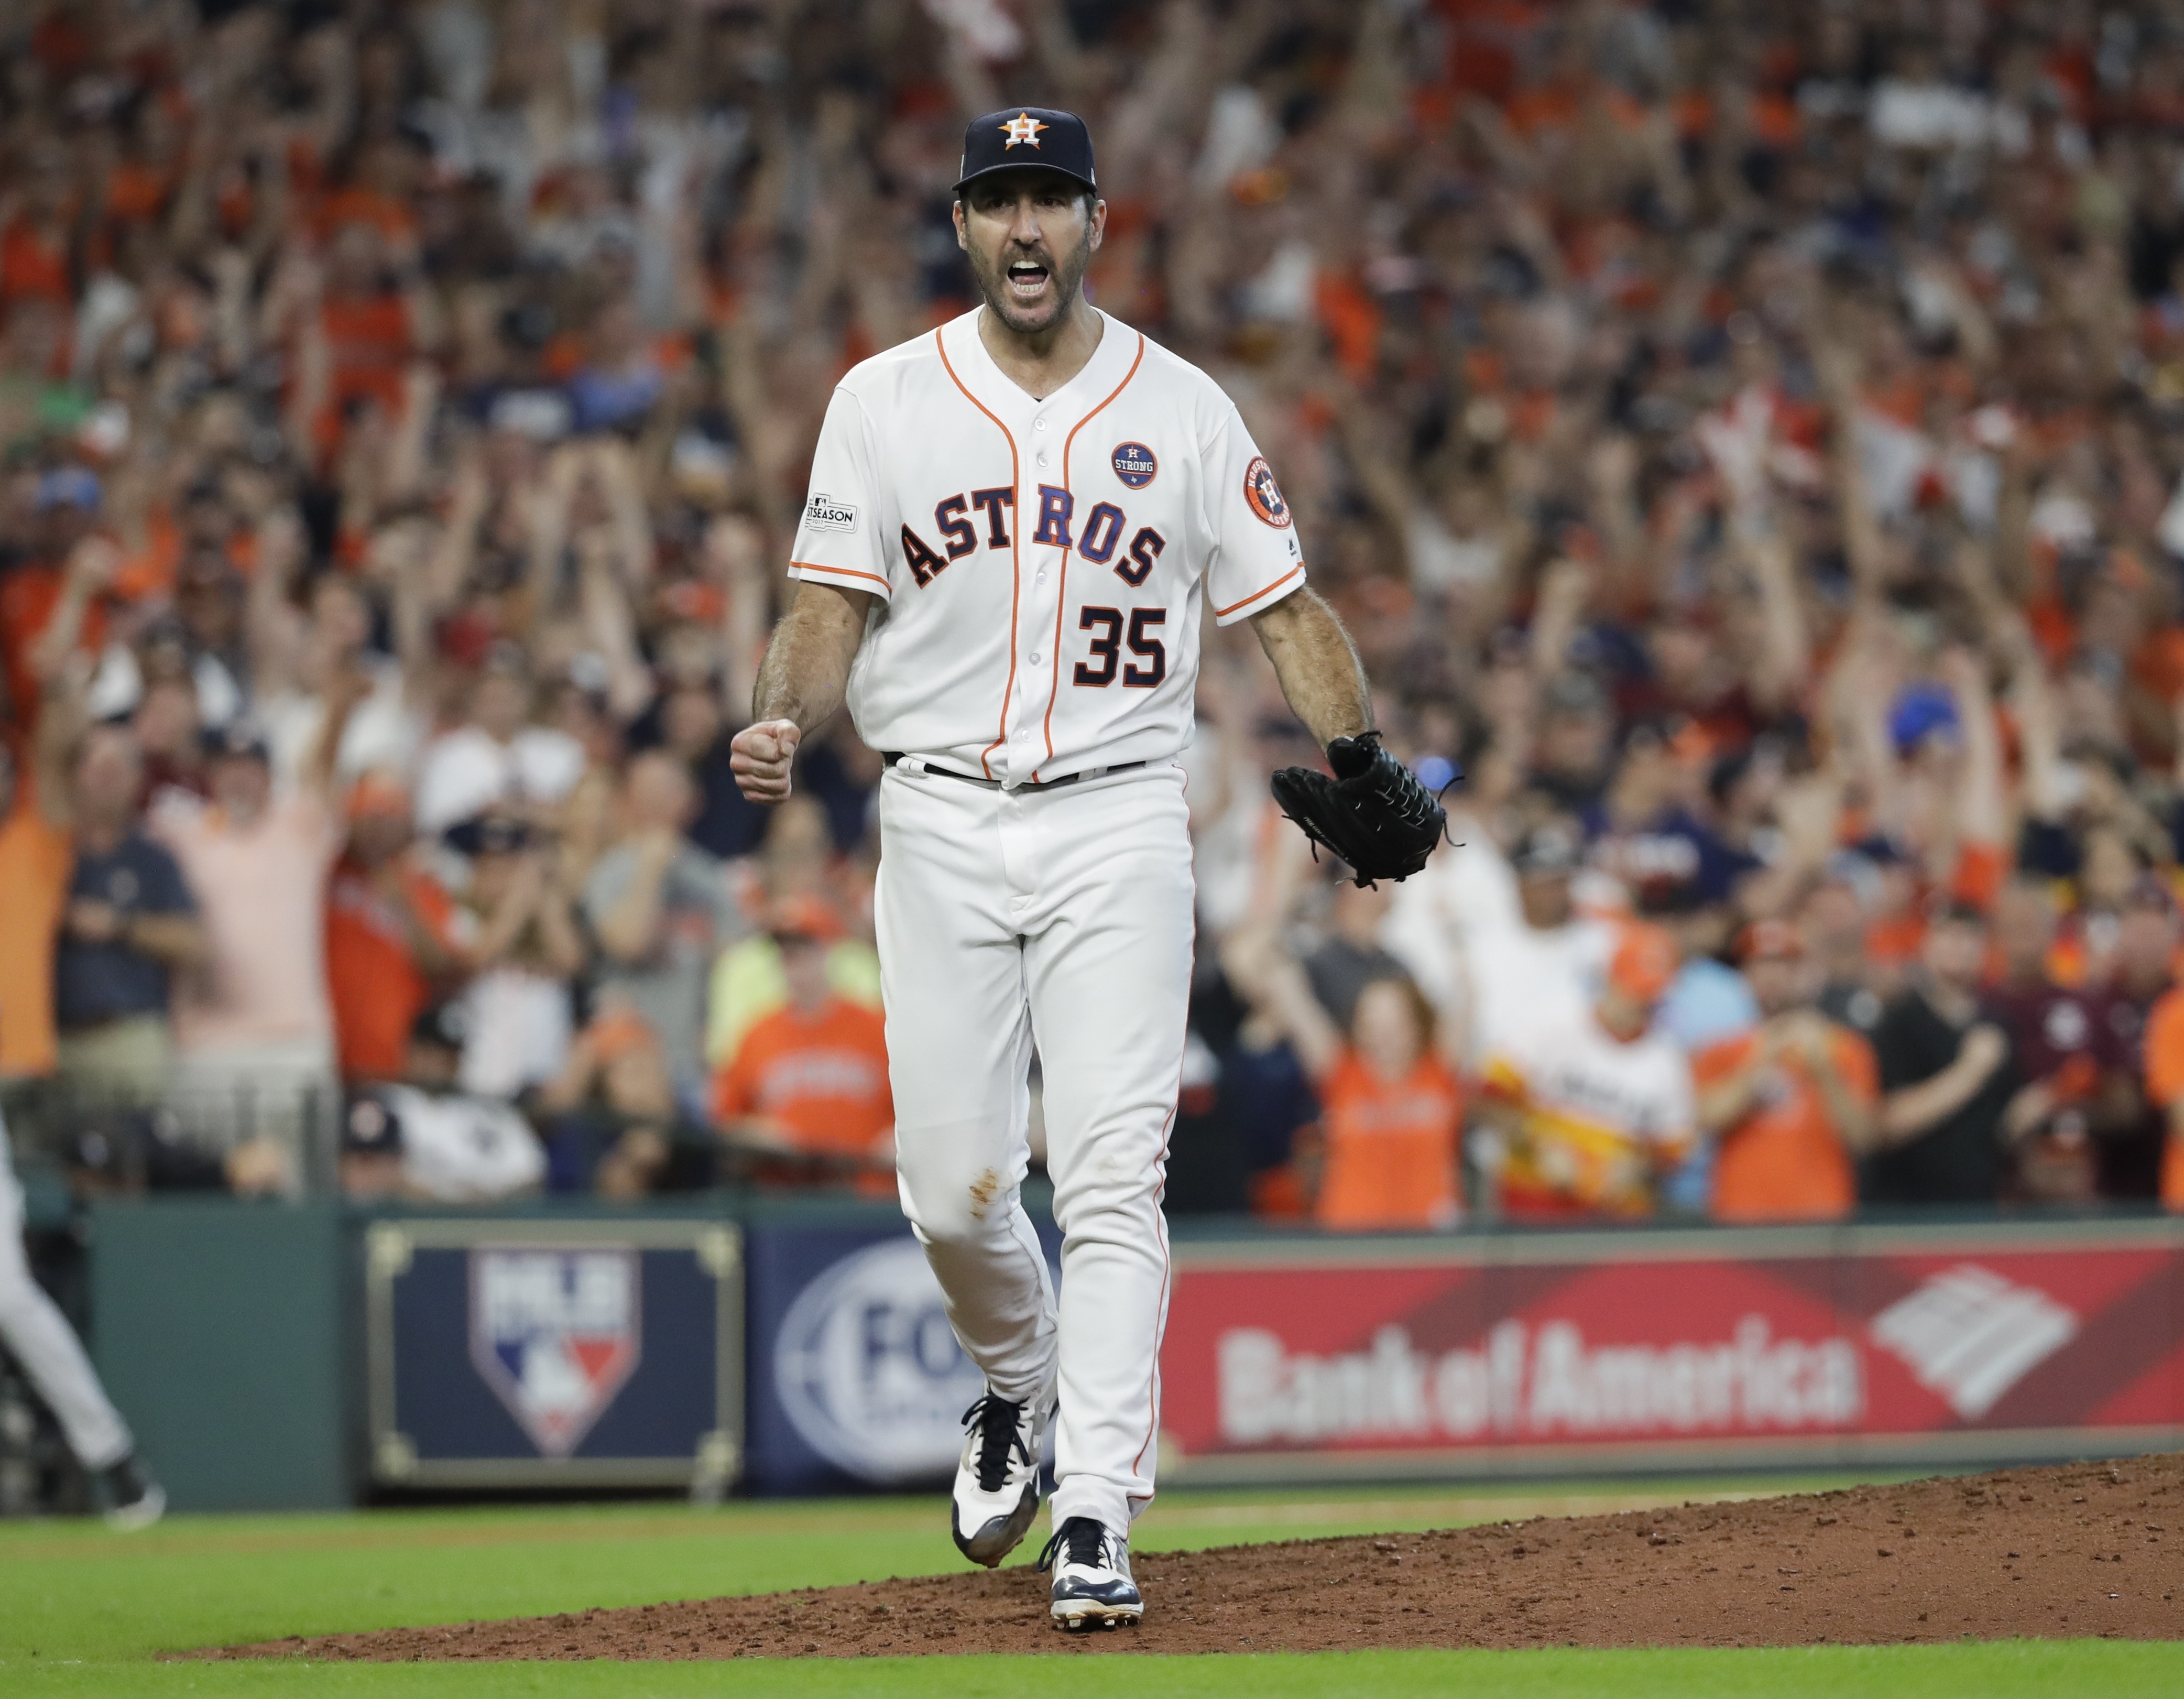 Astros vs. Mariners Game 3 MLB 2022 live stream (10/15) How to